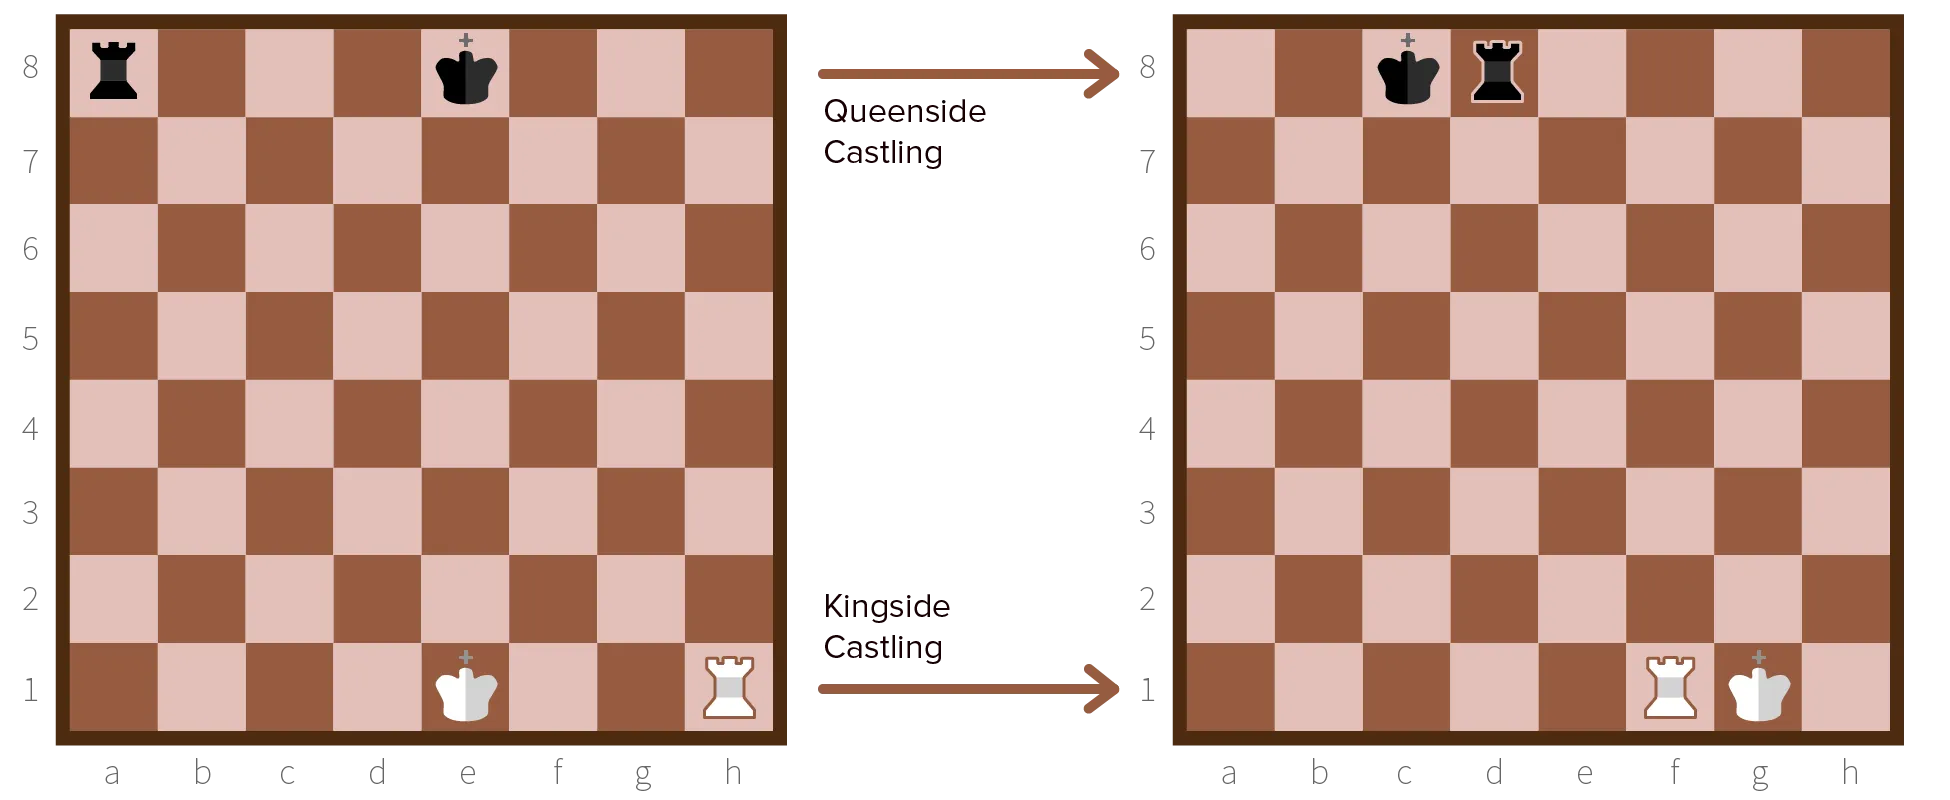 Example of castling in chess.